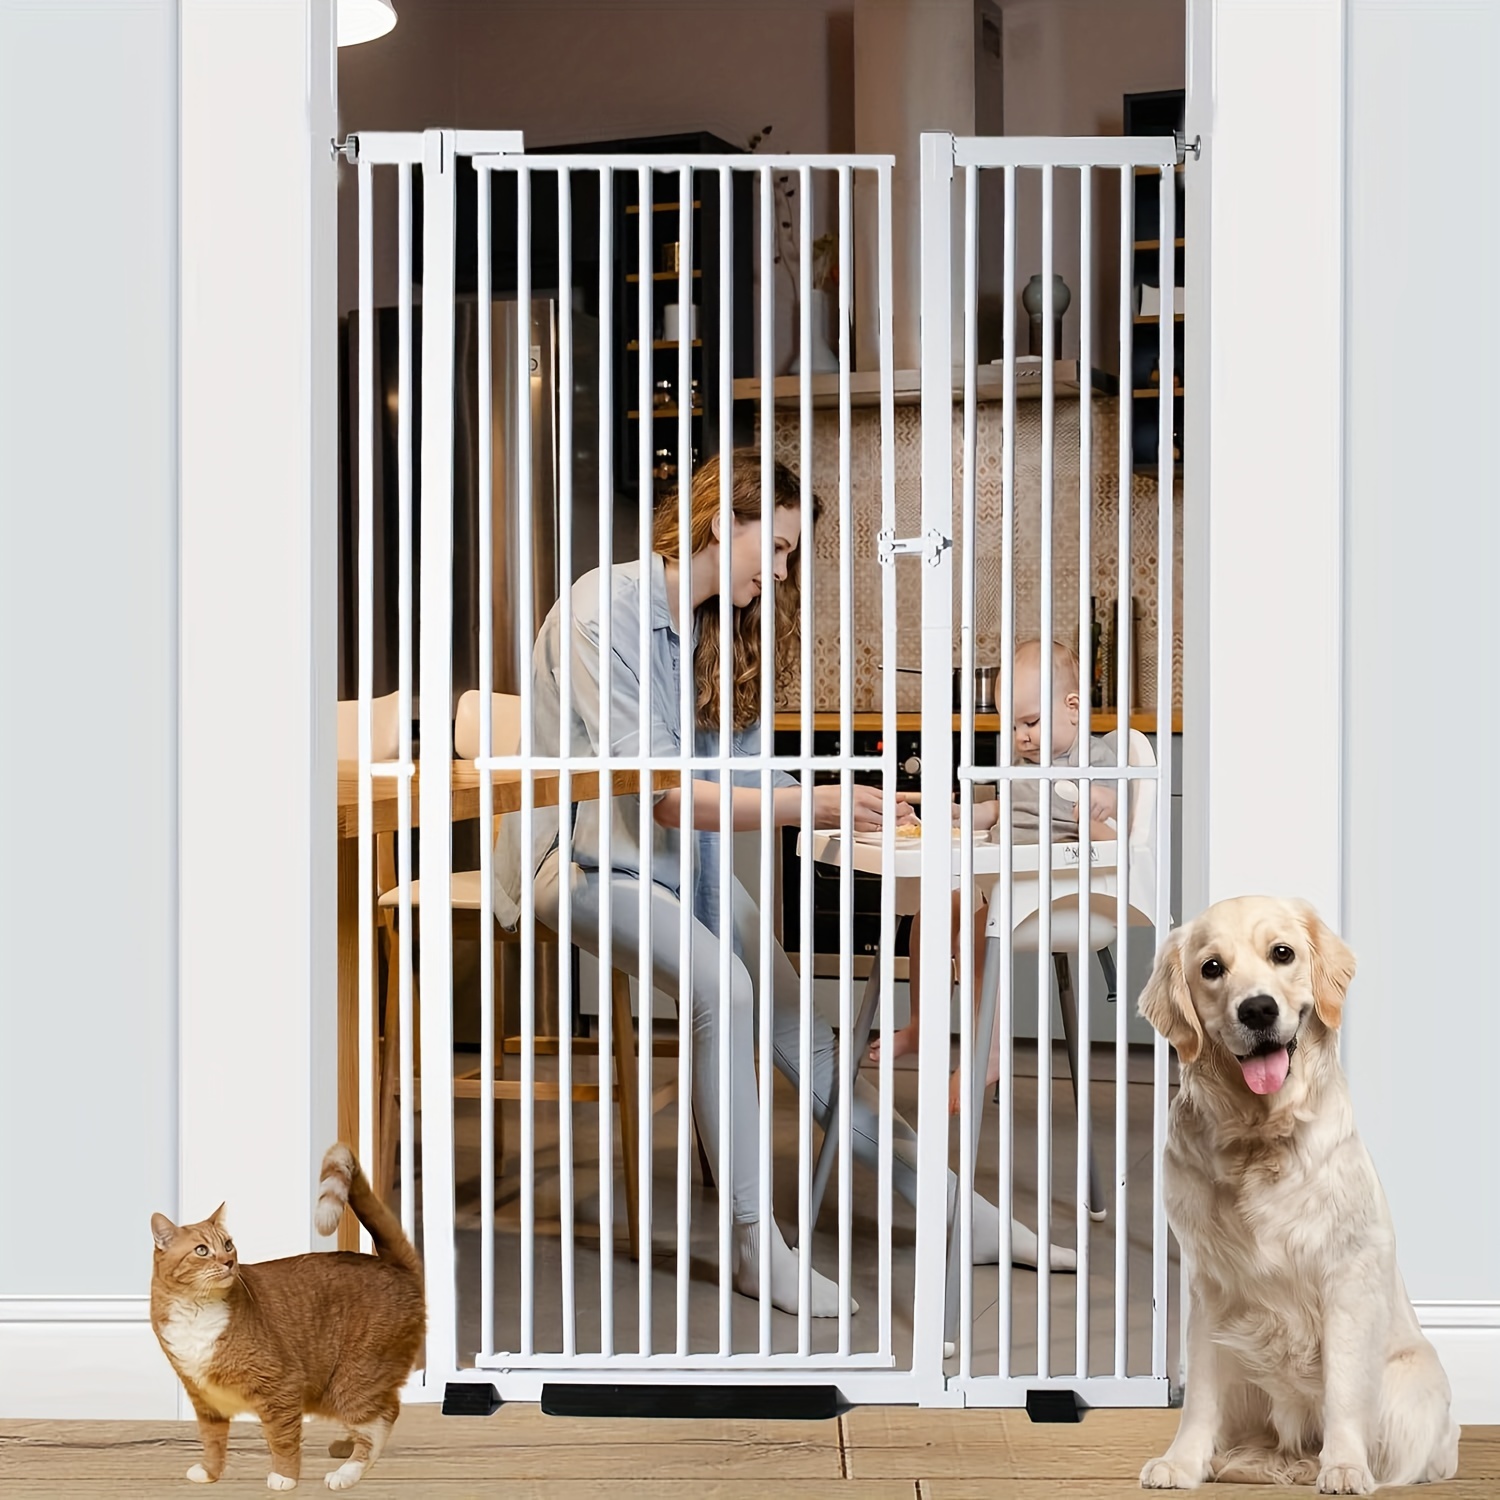 

71 Inch Extra Tall Pet Gate Baby Gate, 29.13"-45.62" Extra Wide Pressure Mounted Walk Through Swing Safety Cat Gates For Stairs, Doorways, Kitchen, As , Chrismas Gift